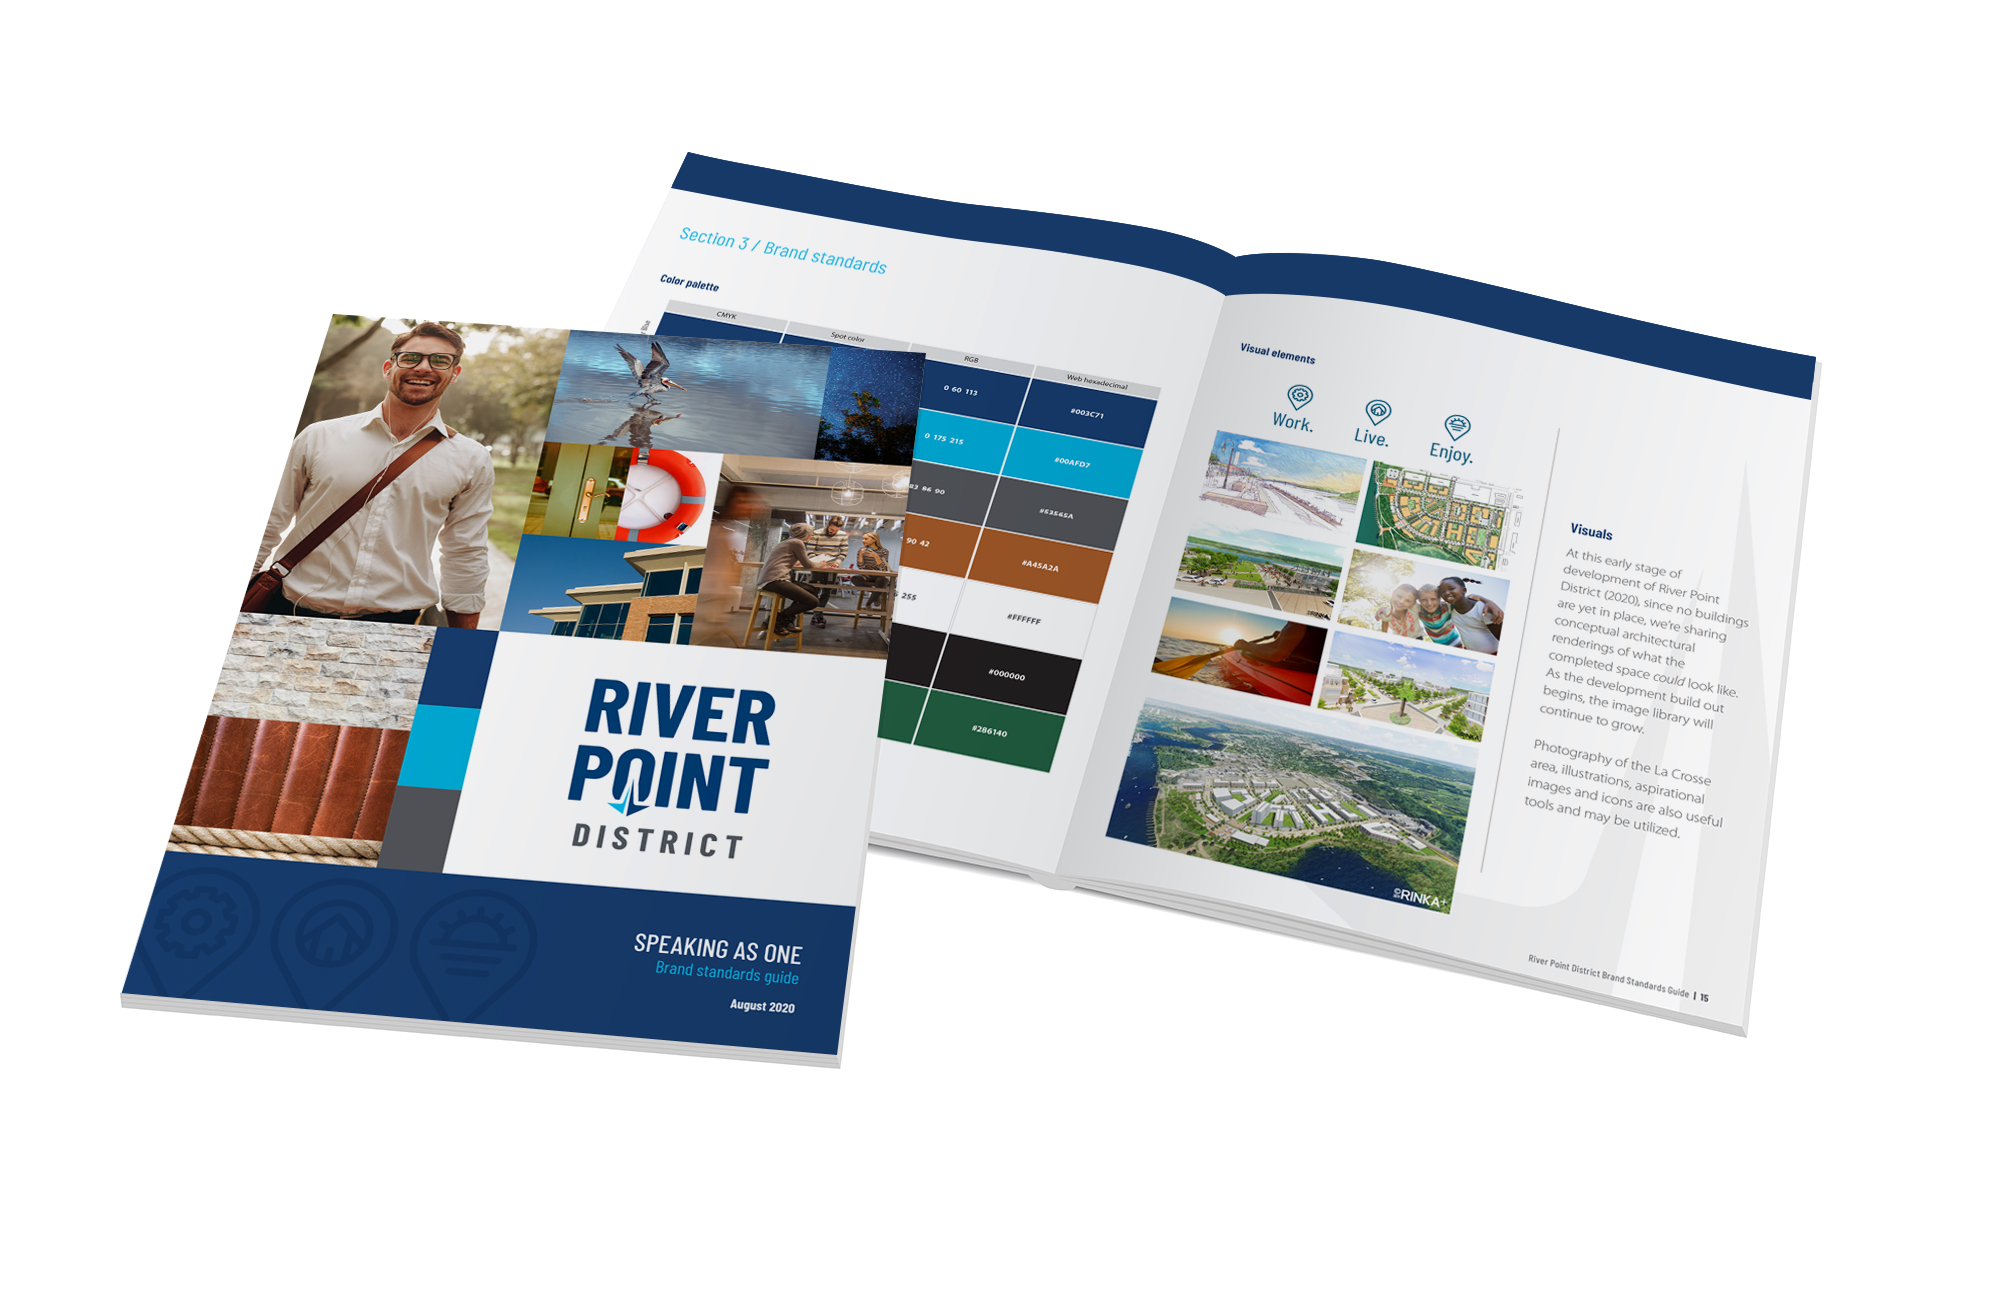 Pages from the River Point District brand Speaking as one brand standards guide created by Vendi Advertising